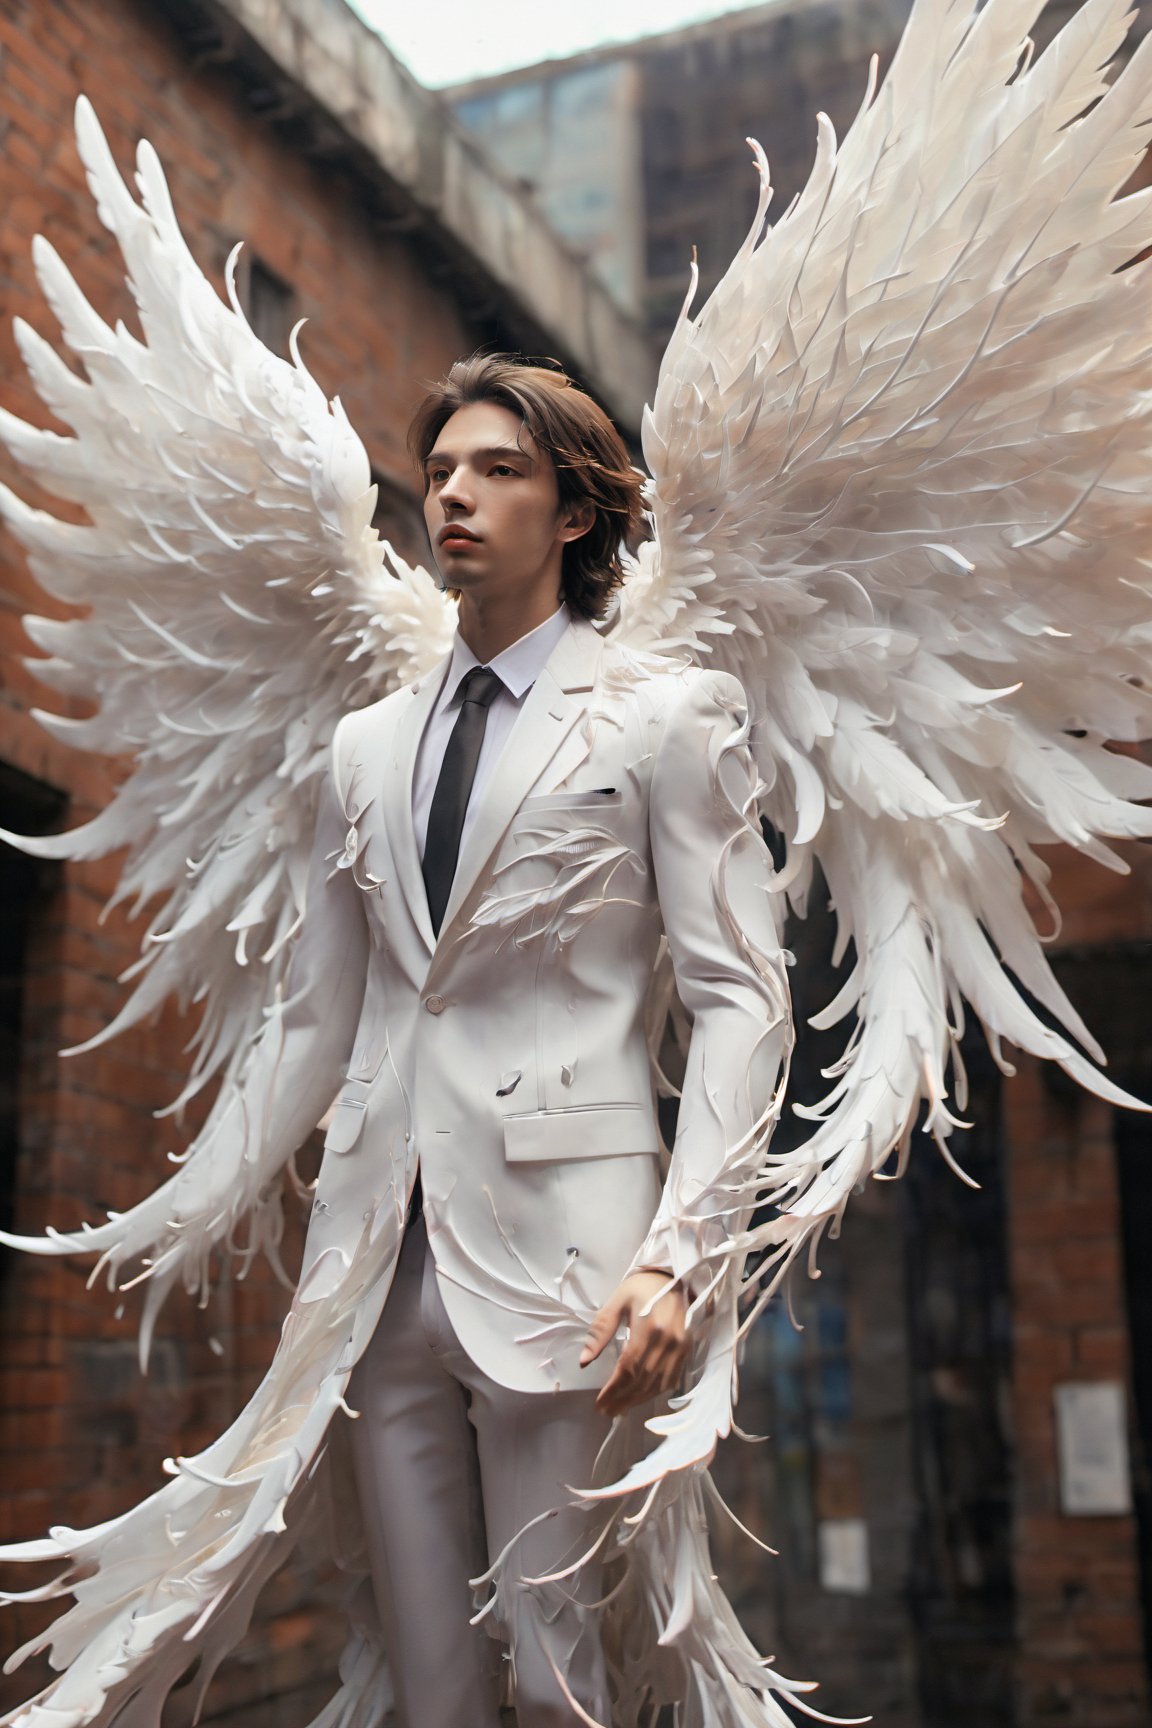 Create an image of a young man wearing a suit, featuring vibrant, white wings extending from his back. Random movement The background should be plain white, emphasizing the contrast and detailing of the beauty wings and the sharpness of the suit. The man should appear poised and elegant, with the wings unfurled to showcase a spectrum of vivid hues, blending seamlessly from one color to another. The focus should be on the meticulous details of the wings’ feathers and the suit’s fabric, capturing a harmonious blend of natural and refined elements, wings,Stylish, close up,l3min,xxmixgirl,fire element,wings,ice and water,composed of elements of thunder,thunder,electricity